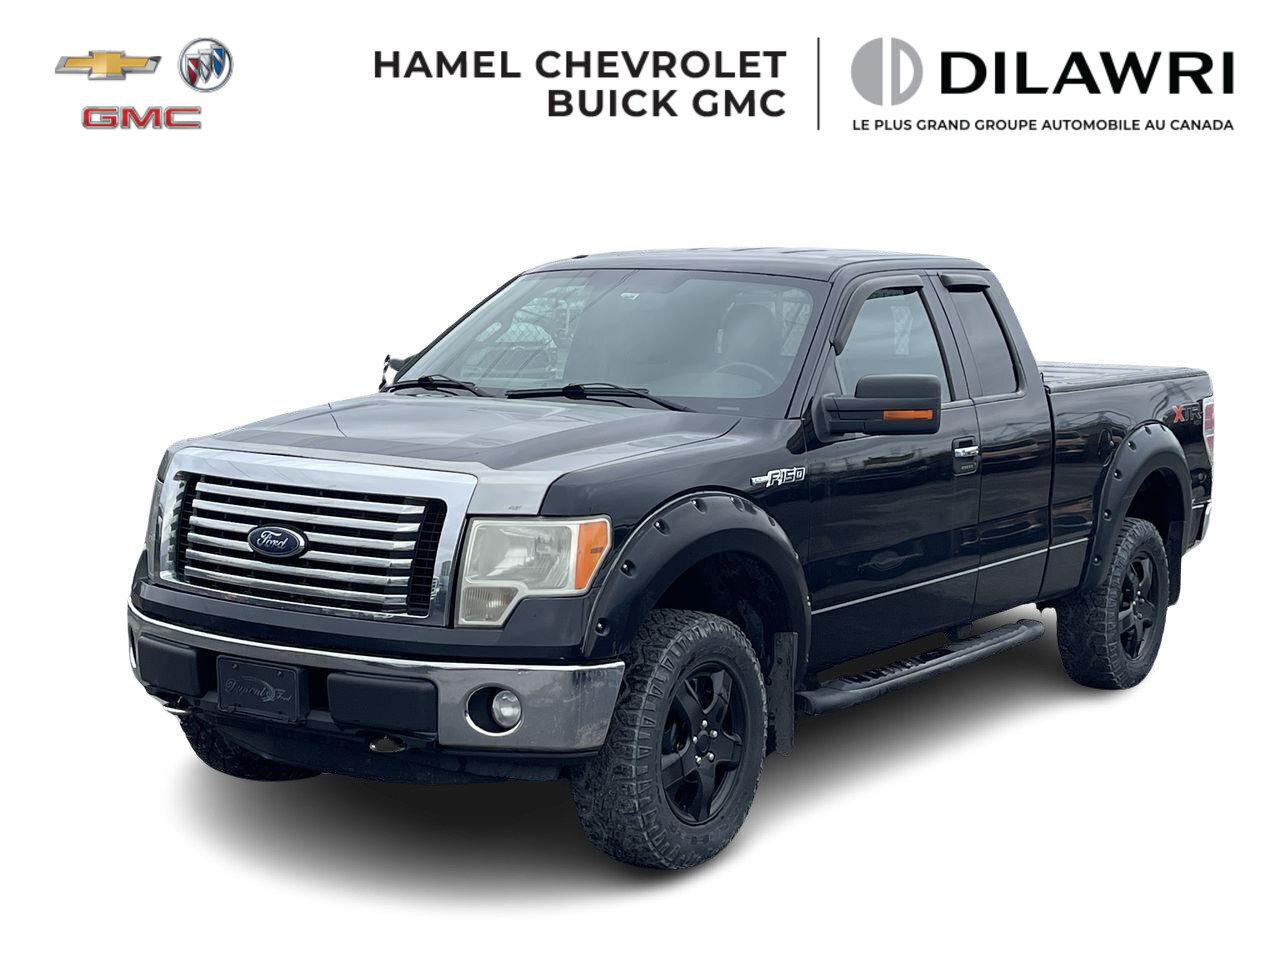 2012 Ford F-150 XLT AWD 4X4 + 5.0L V8 + GROUPE ELECTRIQUE + CRUISE